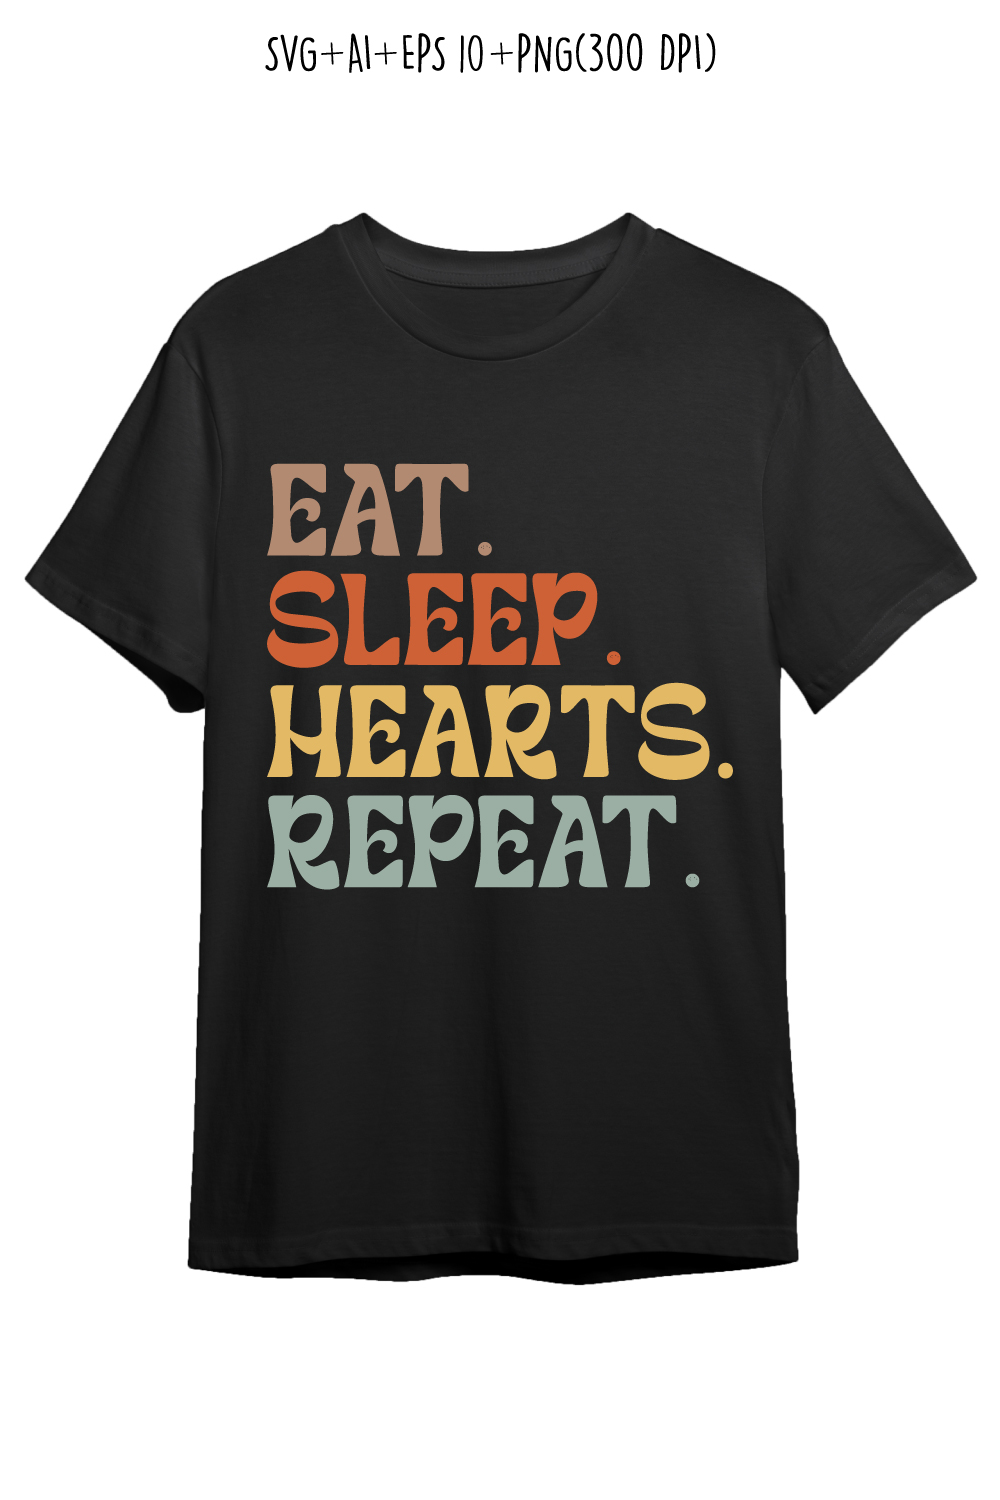 Eat Sleep Hearts Repeat indoor game typography design for t-shirts, cards, frame artwork, phone cases, bags, mugs, stickers, tumblers, print, etc pinterest preview image.